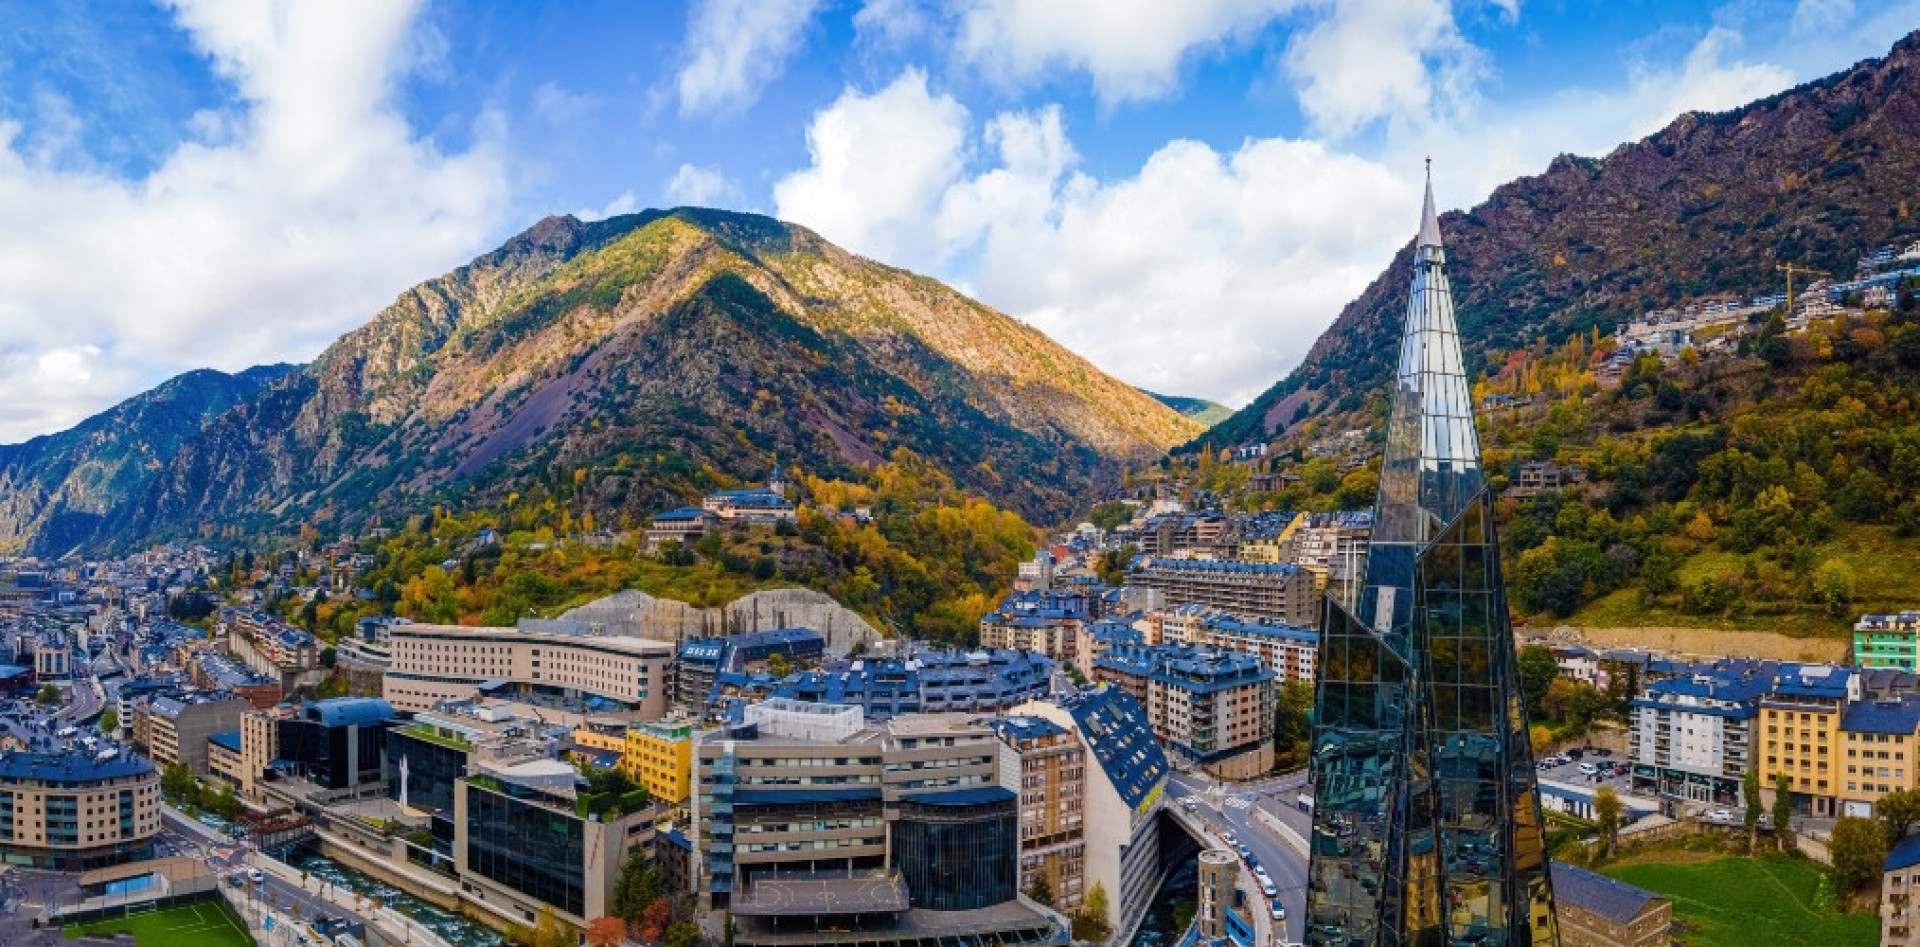 <p>Andorra’s ranking highlights the success of its public health policies and social environment in supporting long and fulfilling lives for its population.</p><p><a href="https://www.msn.com/en-us/community/channel/vid-7xx8mnucu55yw63we9va2gwr7uihbxwc68fxqp25x6tg4ftibpra?cvid=94631541bc0f4f89bfd59158d696ad7e">Follow us and access great exclusive content every day</a></p>